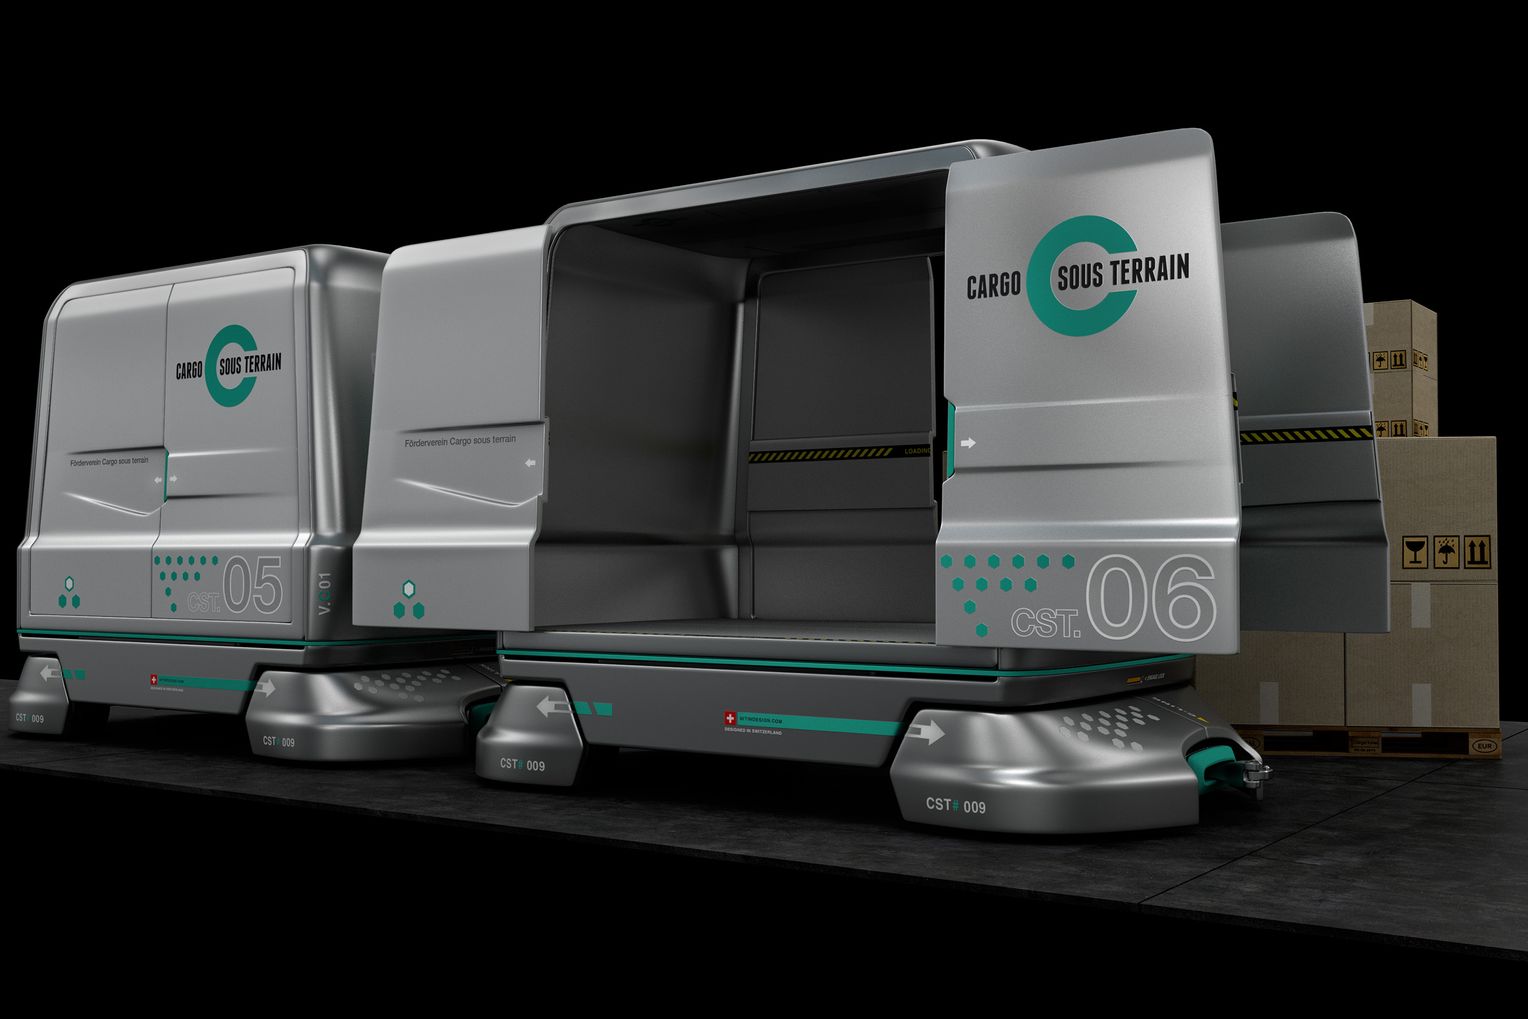 Switzerland plans to implement the Cargo sous terrain system-1